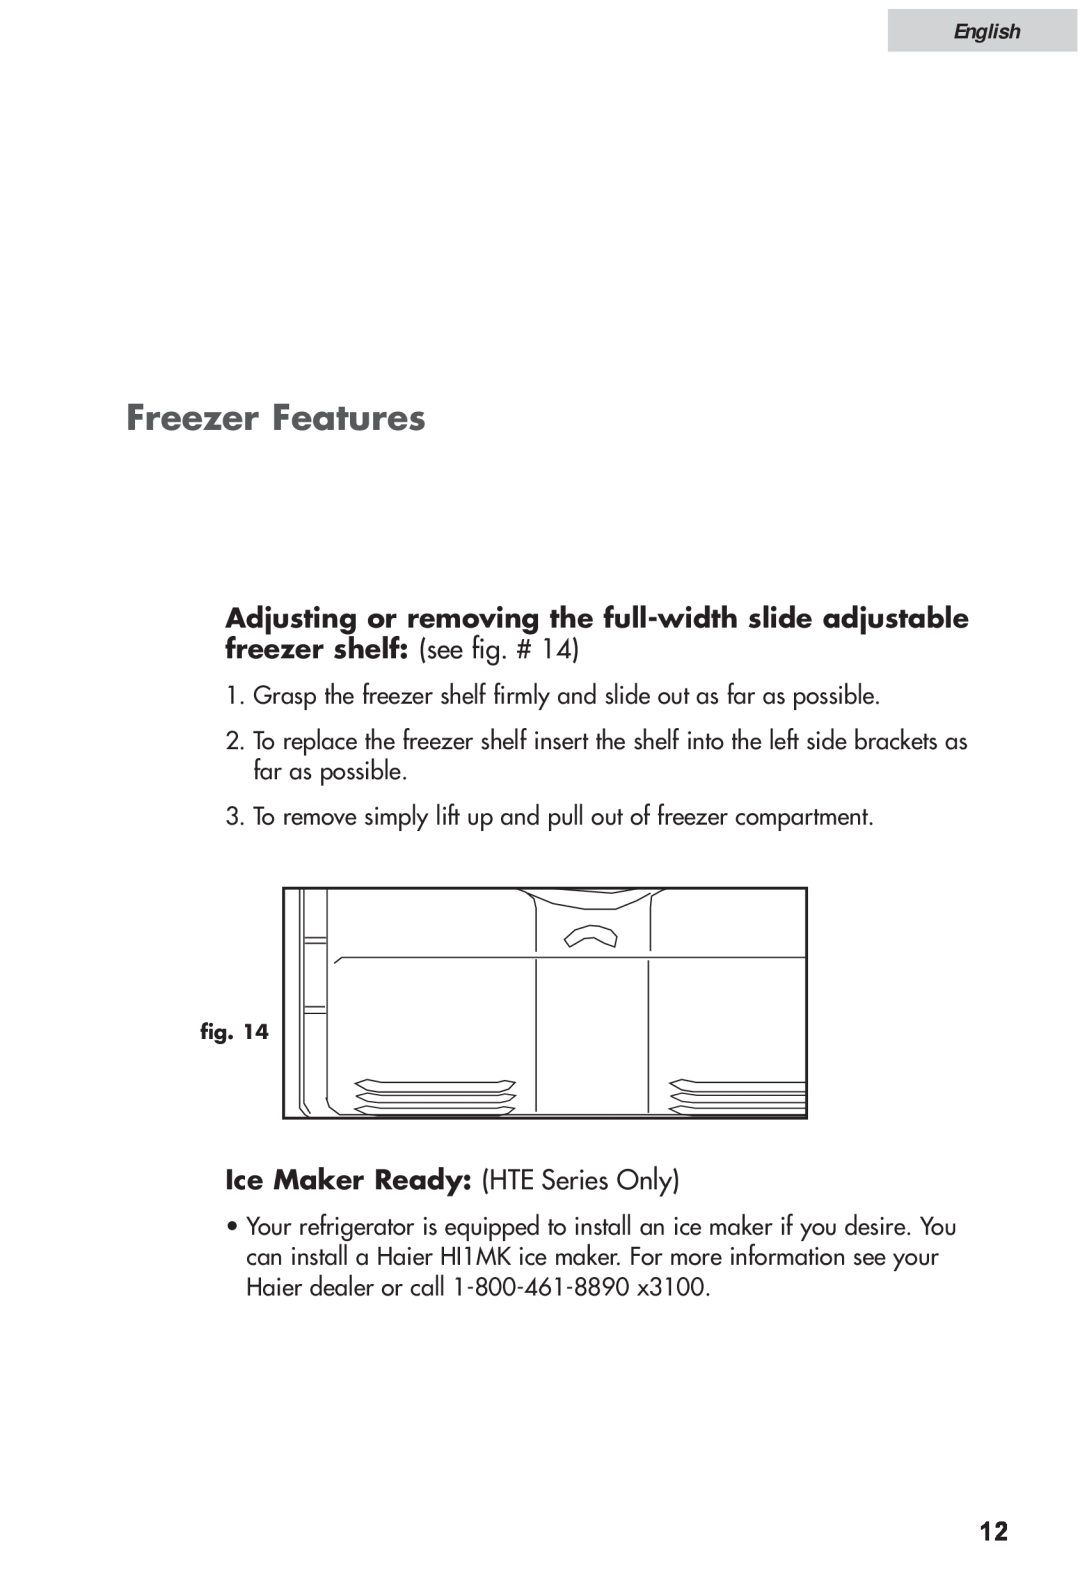 Haier HRF12WNDWW user manual Freezer Features, Ice Maker Ready HTE Series Only, English 